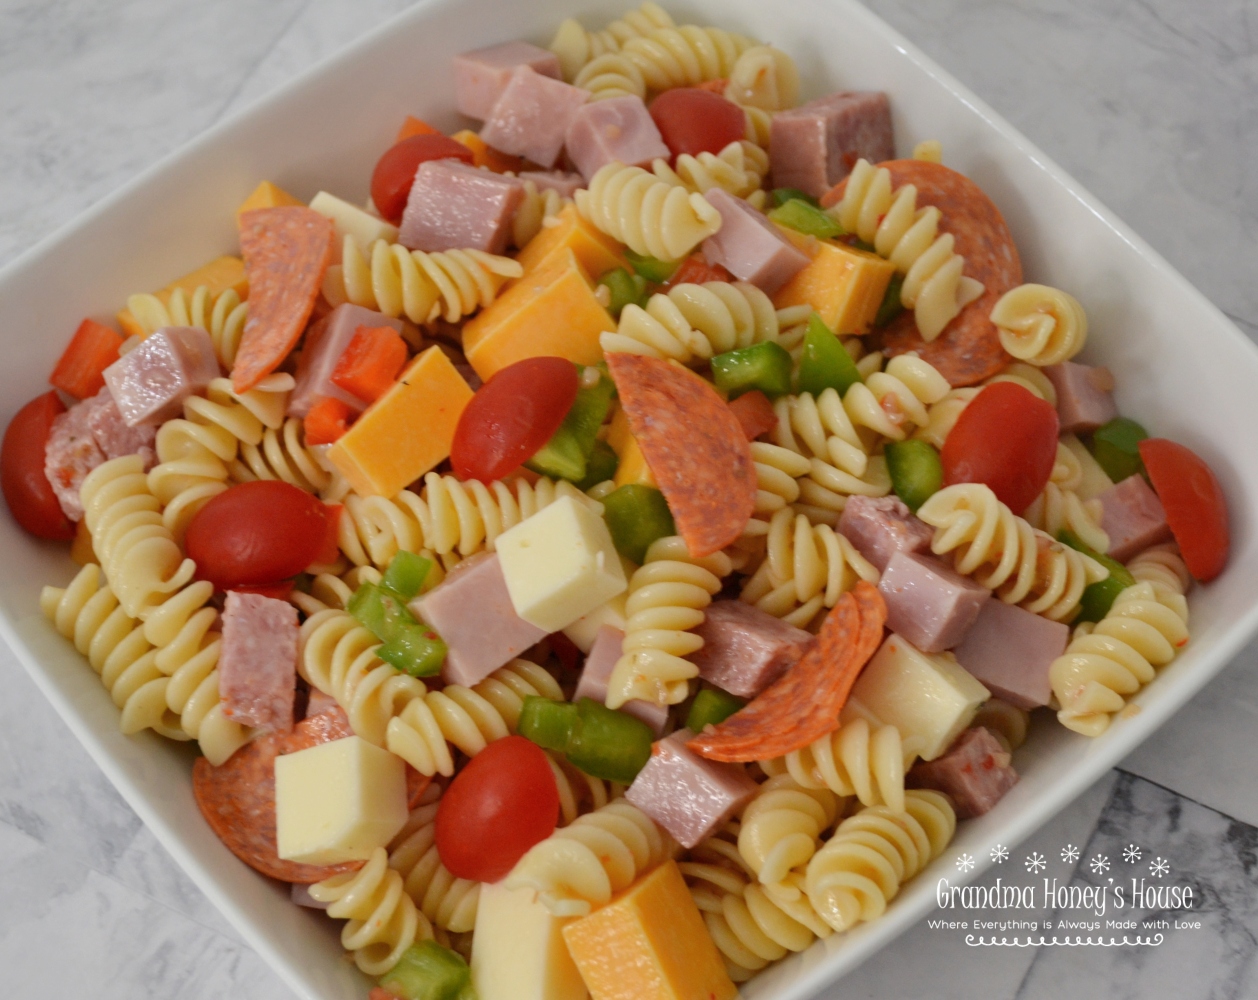 This Protein Packed Pasta Salad is loaded with veggies, meats, and cheeses. Colorful, delicious, and perfect to transport to any summer event.